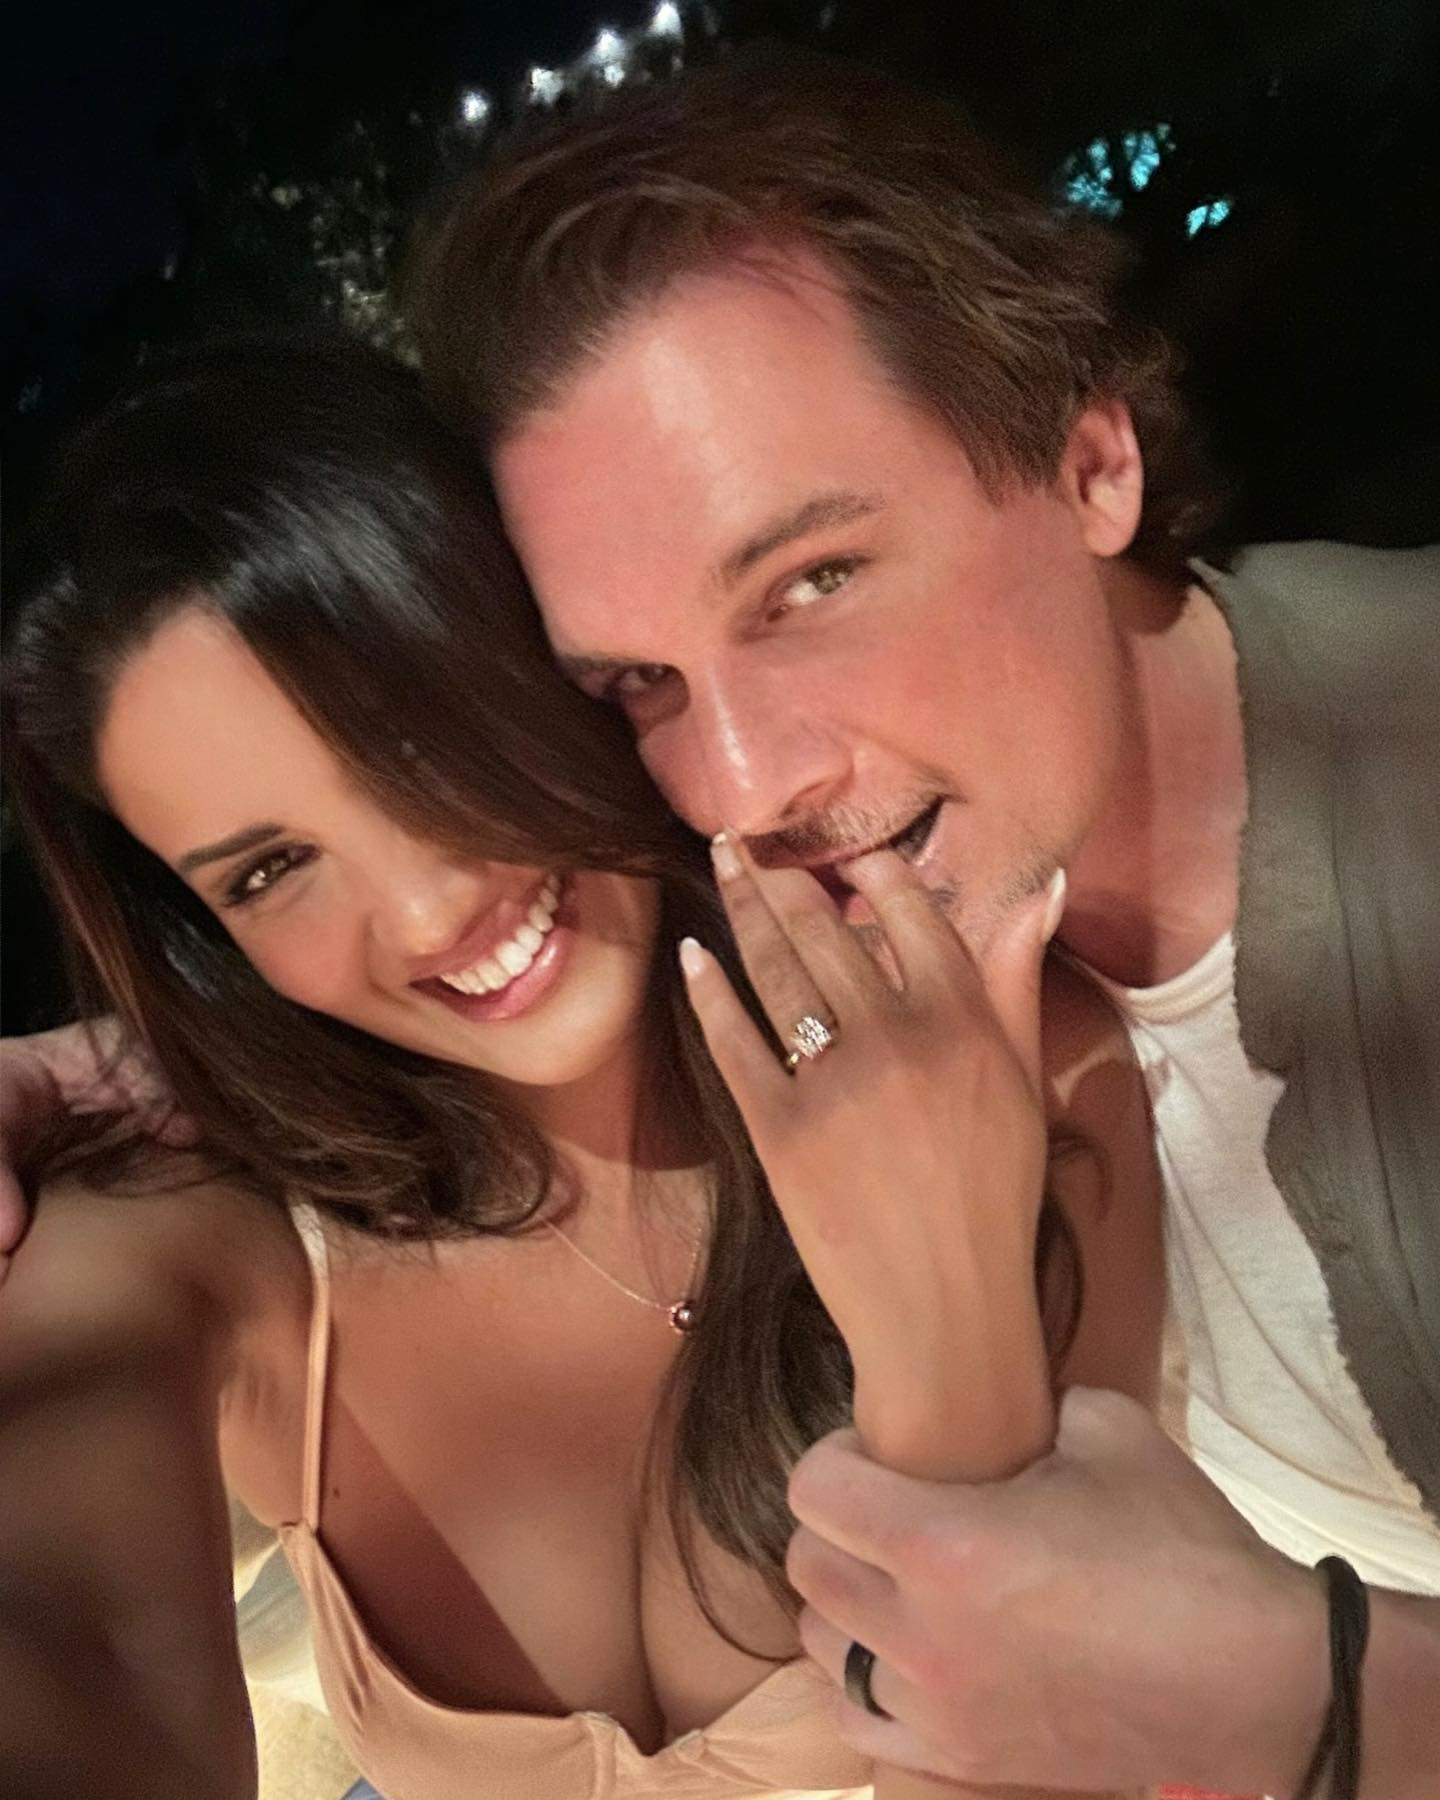 And she showed off an engagement ring after lover Len Wiseman proposed to her in a Mexico restaurant